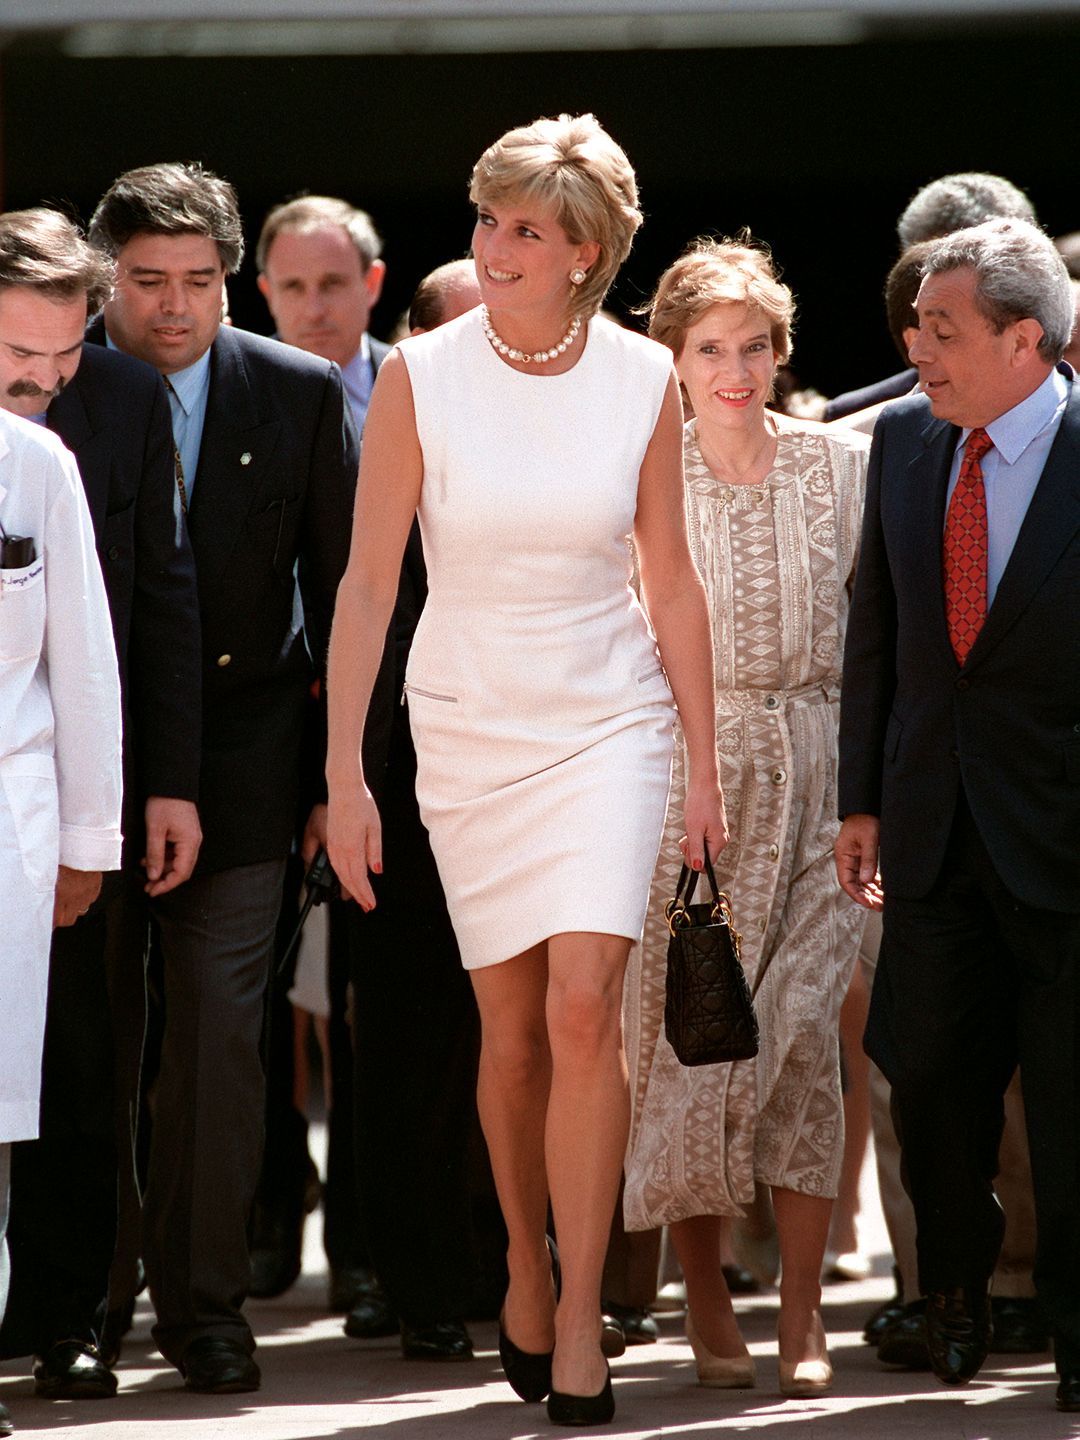 Diana, Princess Of Wales, Arriving In Argentina. The Princess Is Wearing A White Sleeveless Shift Dress Designed By Fashon Designer Versace And Carrying A Black Christian Dior Handbag.